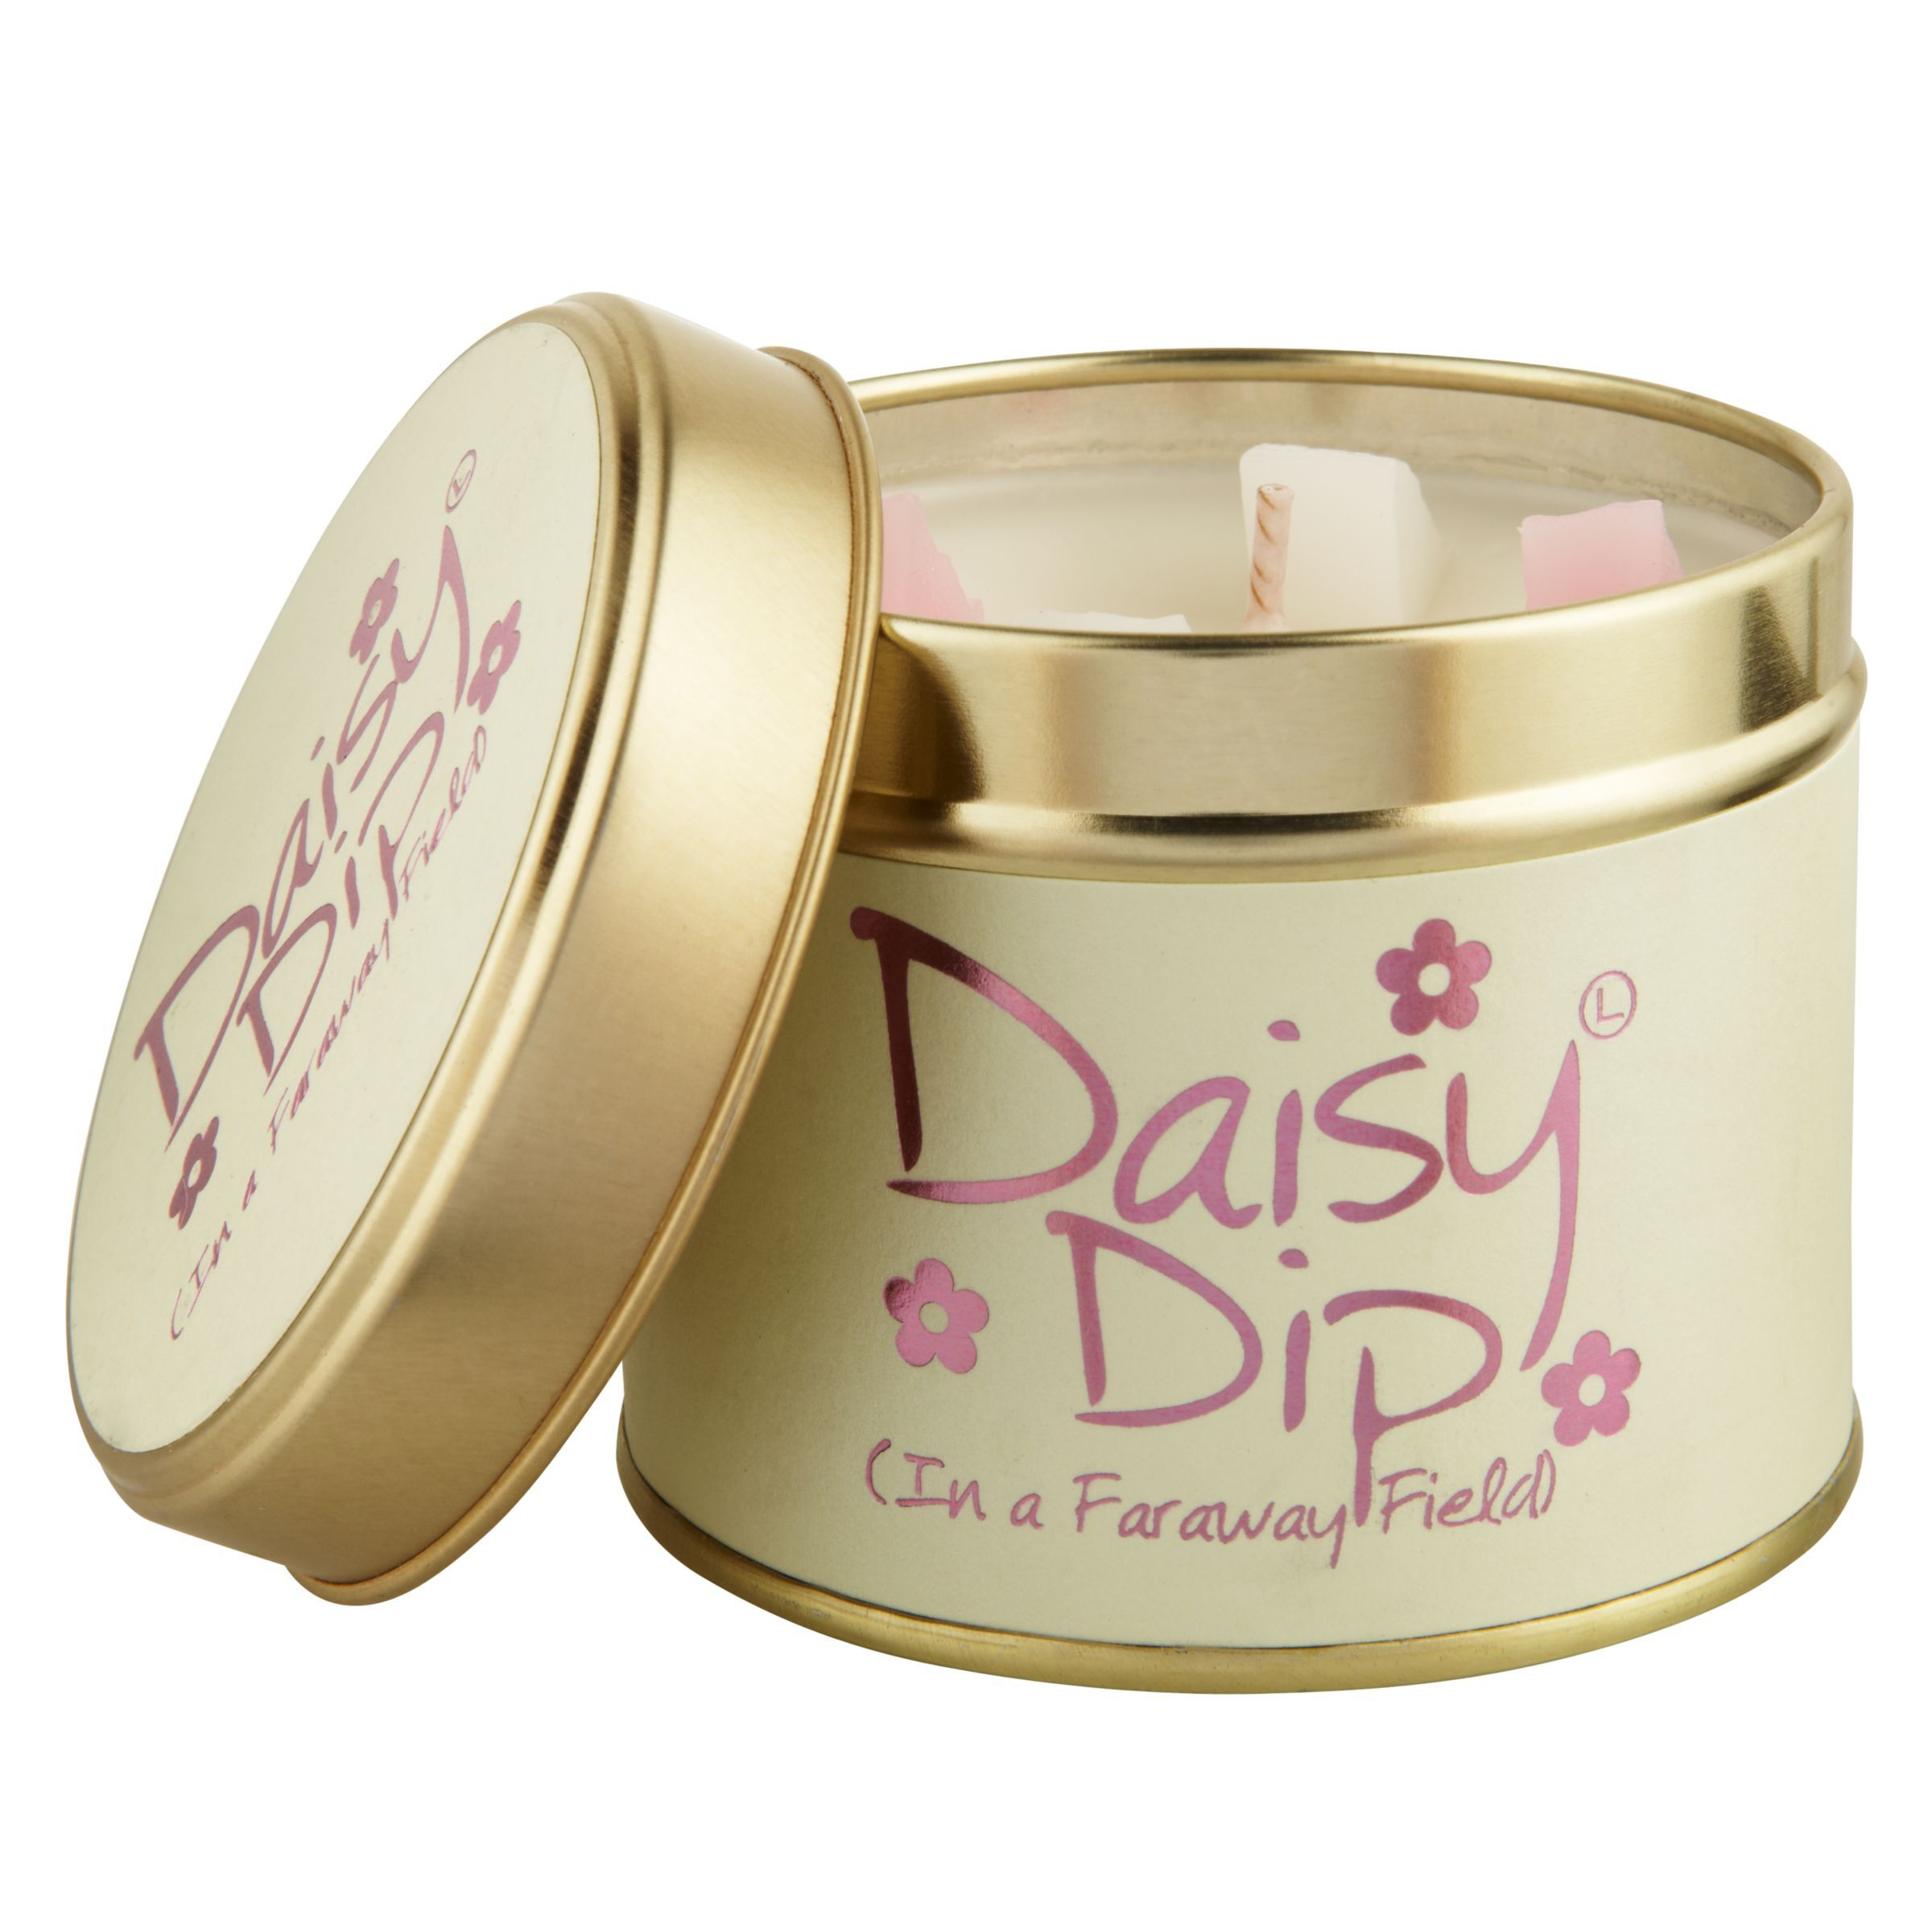 Lily-flame Daisy Dip Scented Tin Candle, 230g - image 1